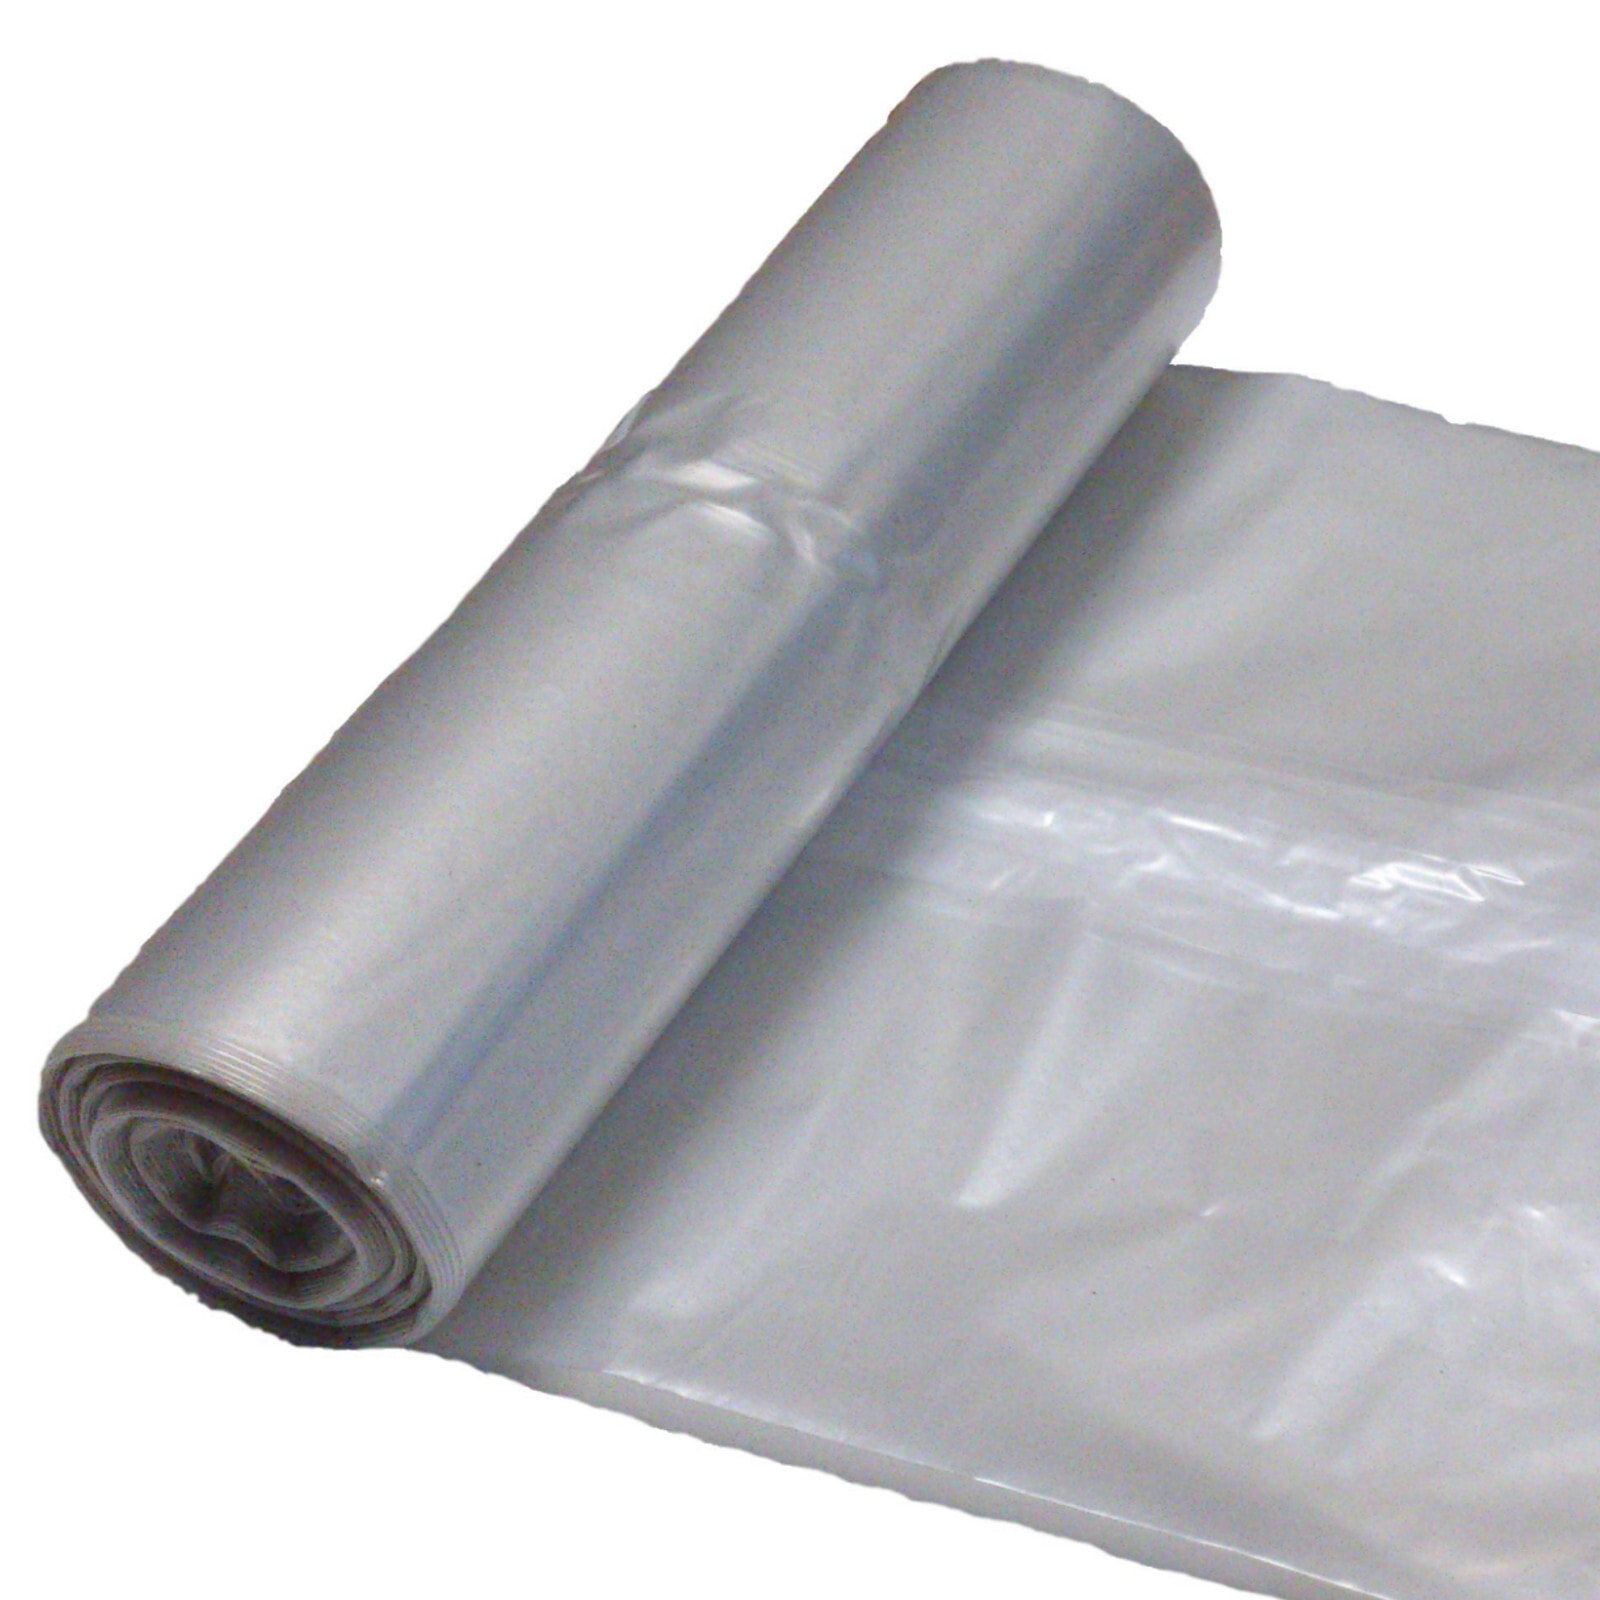 80 micron thick garbage bags. durable roll 5 pcs. - transparent 240L